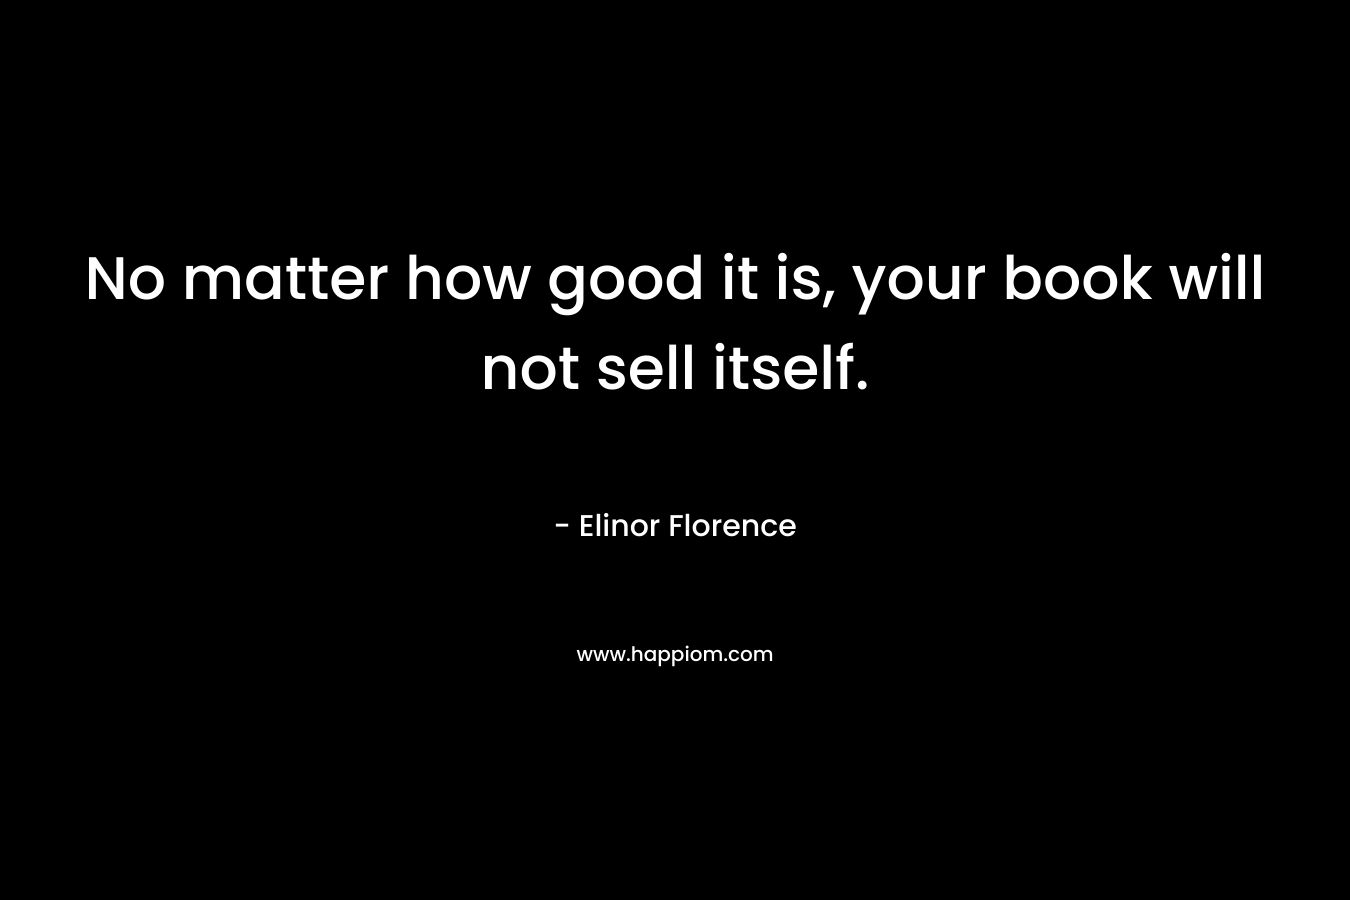 No matter how good it is, your book will not sell itself. – Elinor Florence